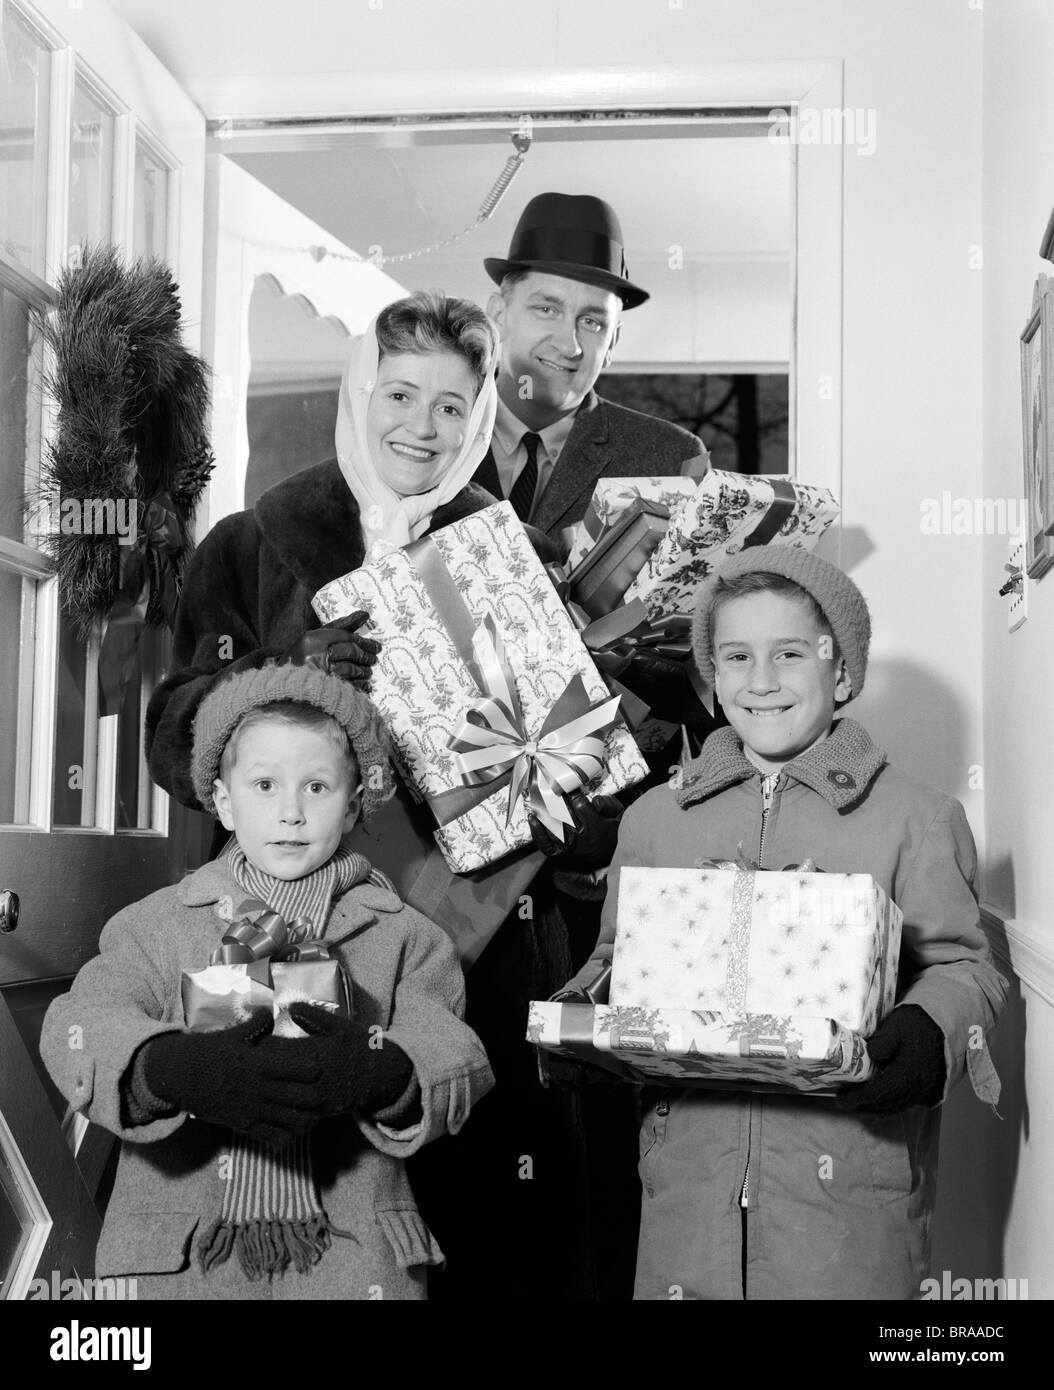 1960s FAMILY STANDING IN DOORWAY OF HOME WEARING WINTER COATS & HATS HOLDING WRAPPED GIFTS Stock Photo